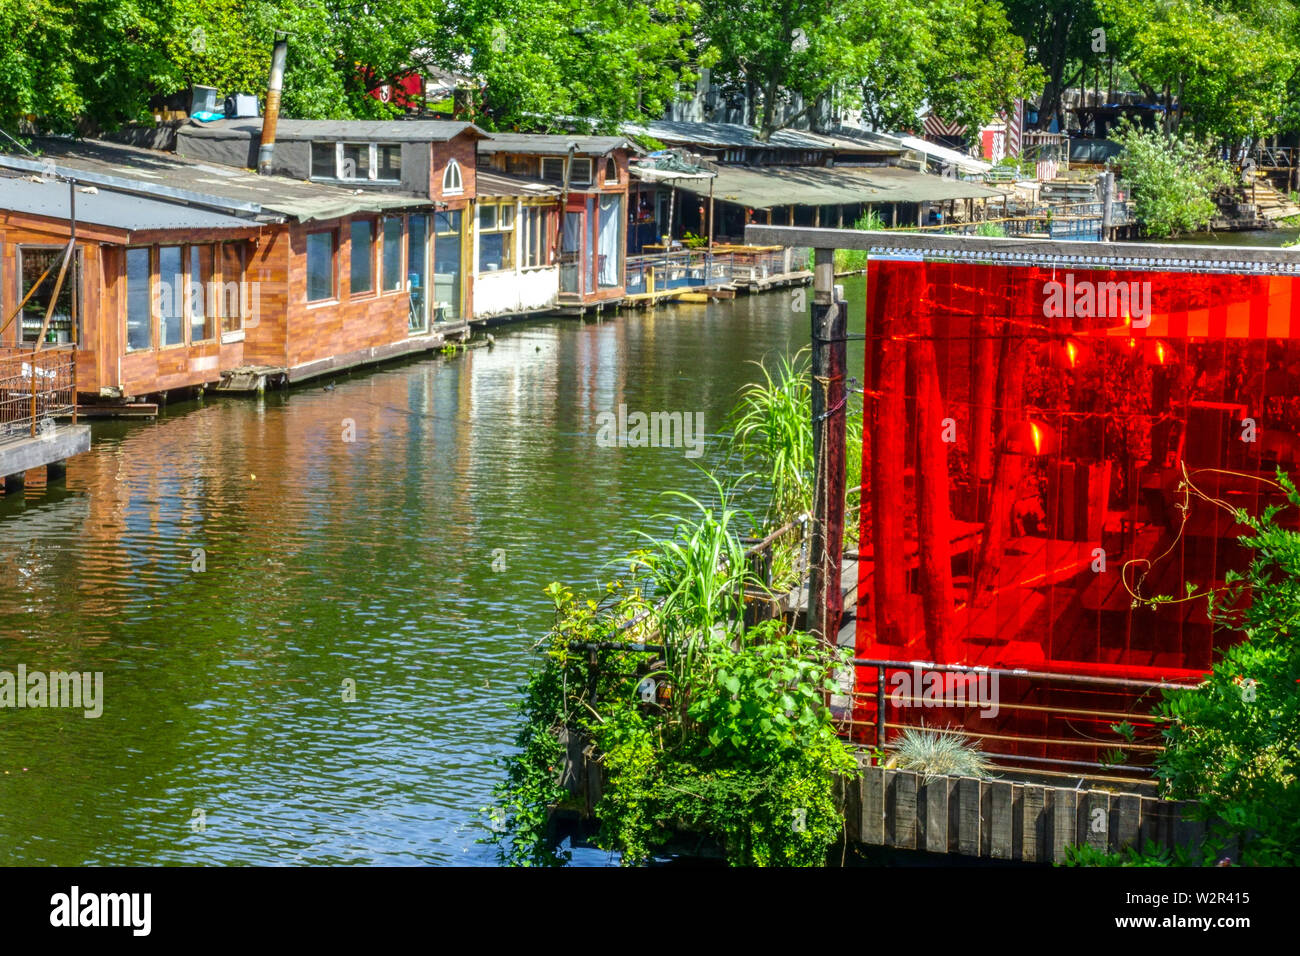 Berlin Spree river, houseboats, and restaurants in Spree canal, Flutgraben water canal, Kreuzberg Germany Stock Photo